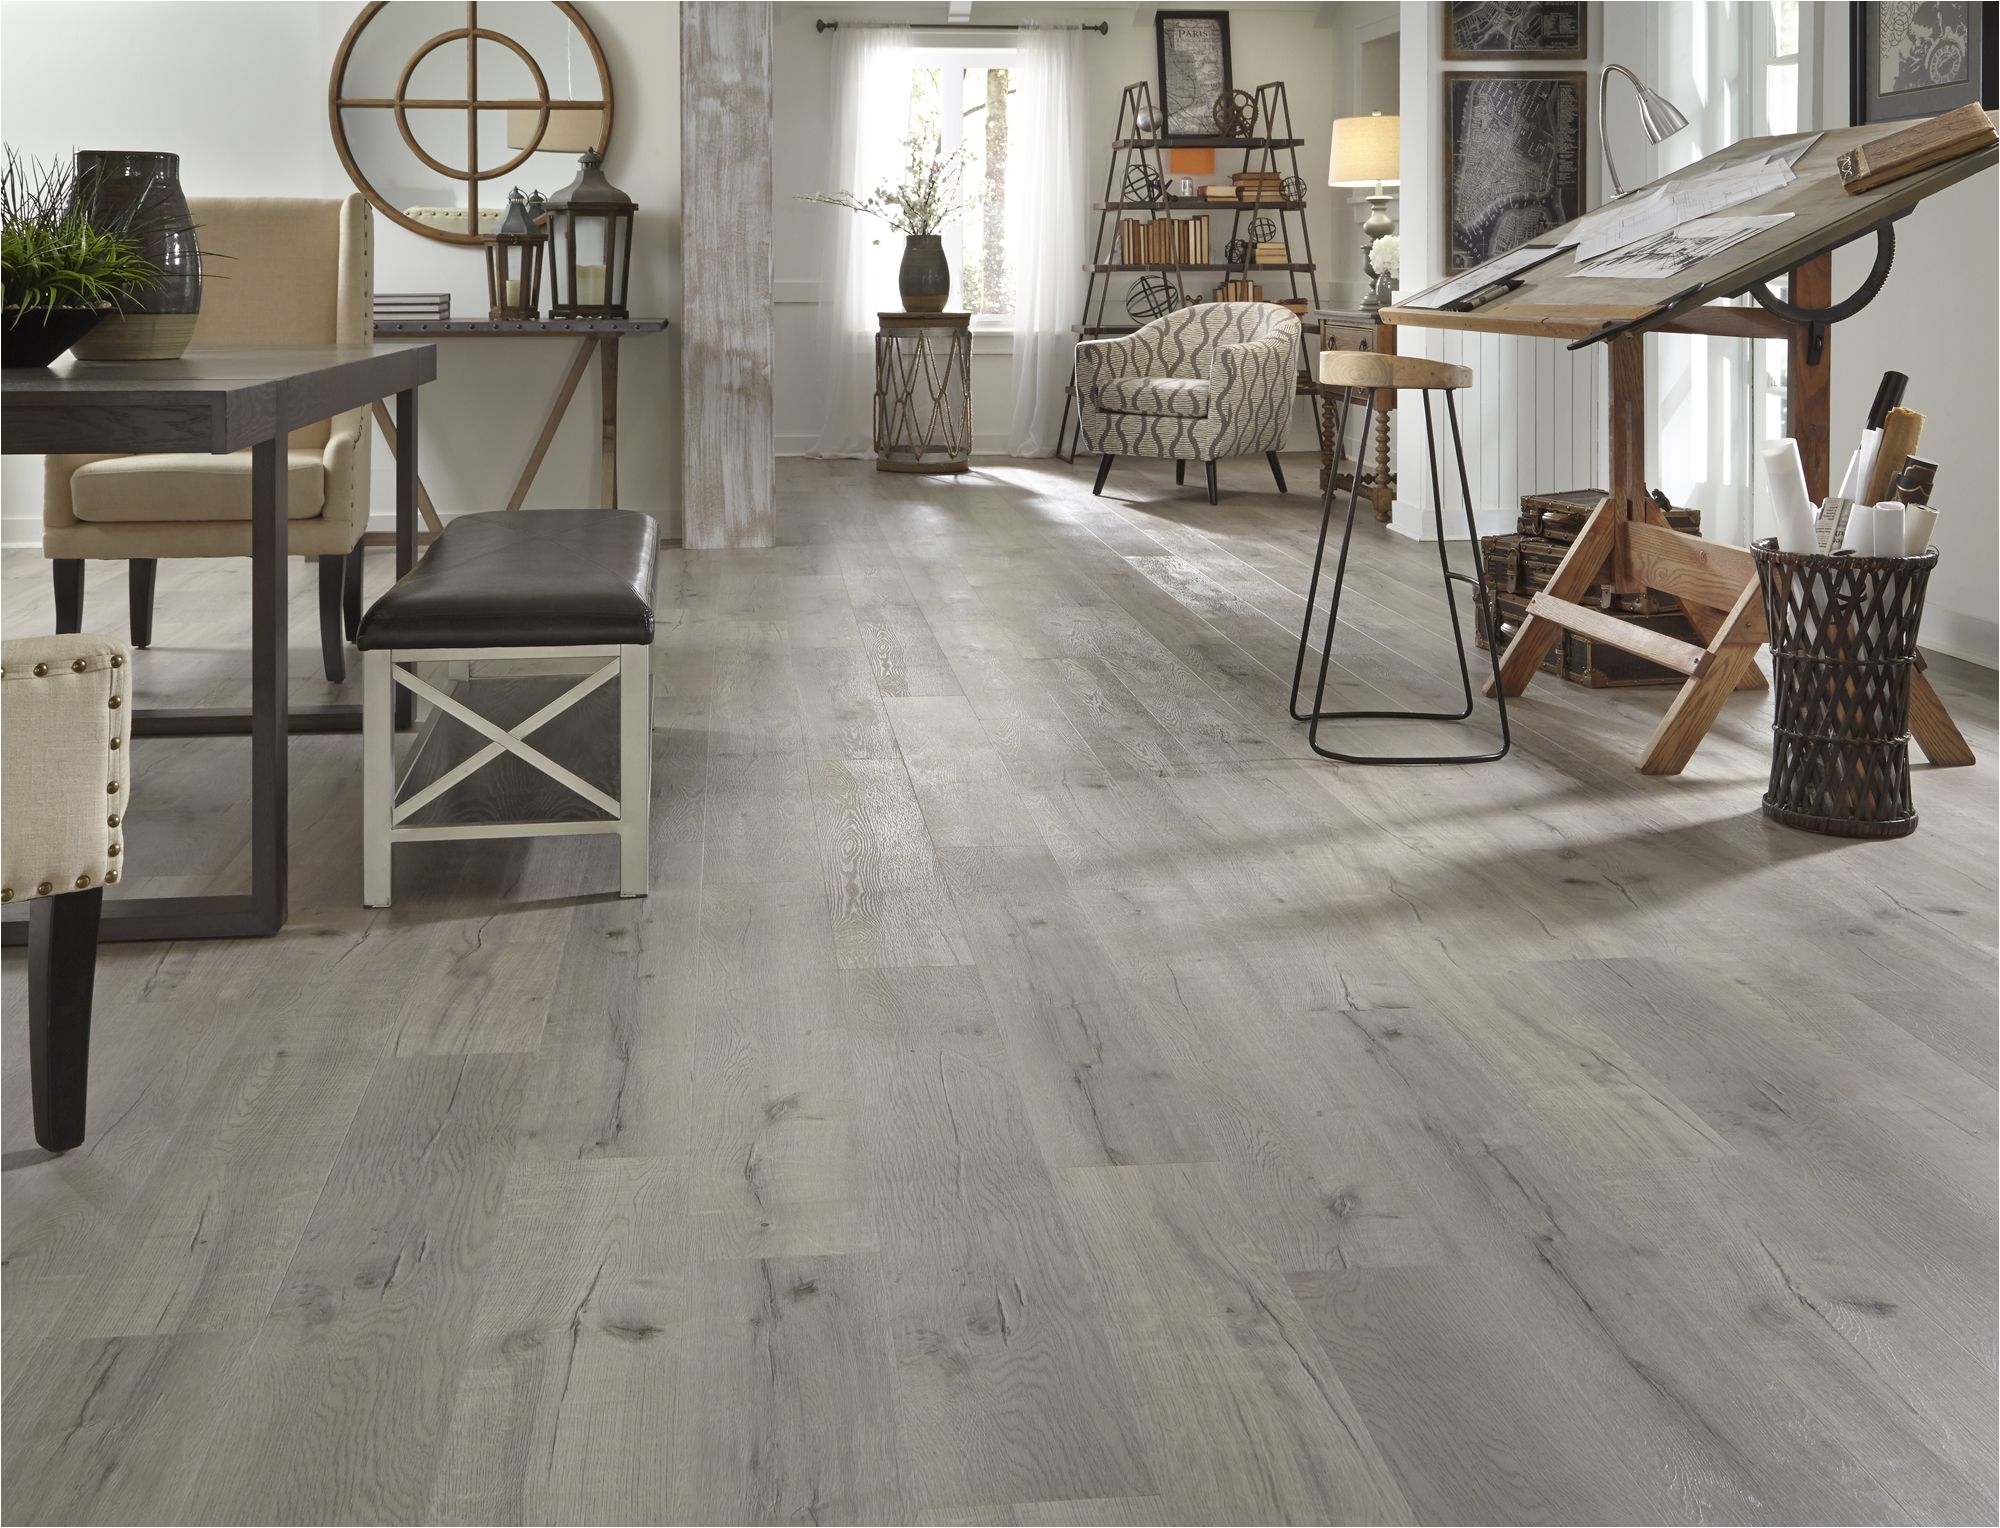 this fall flooring season see 100 new flooring styles like driftwood hickory evp it s part of a new line of waterproof flooring that s ideal for any space